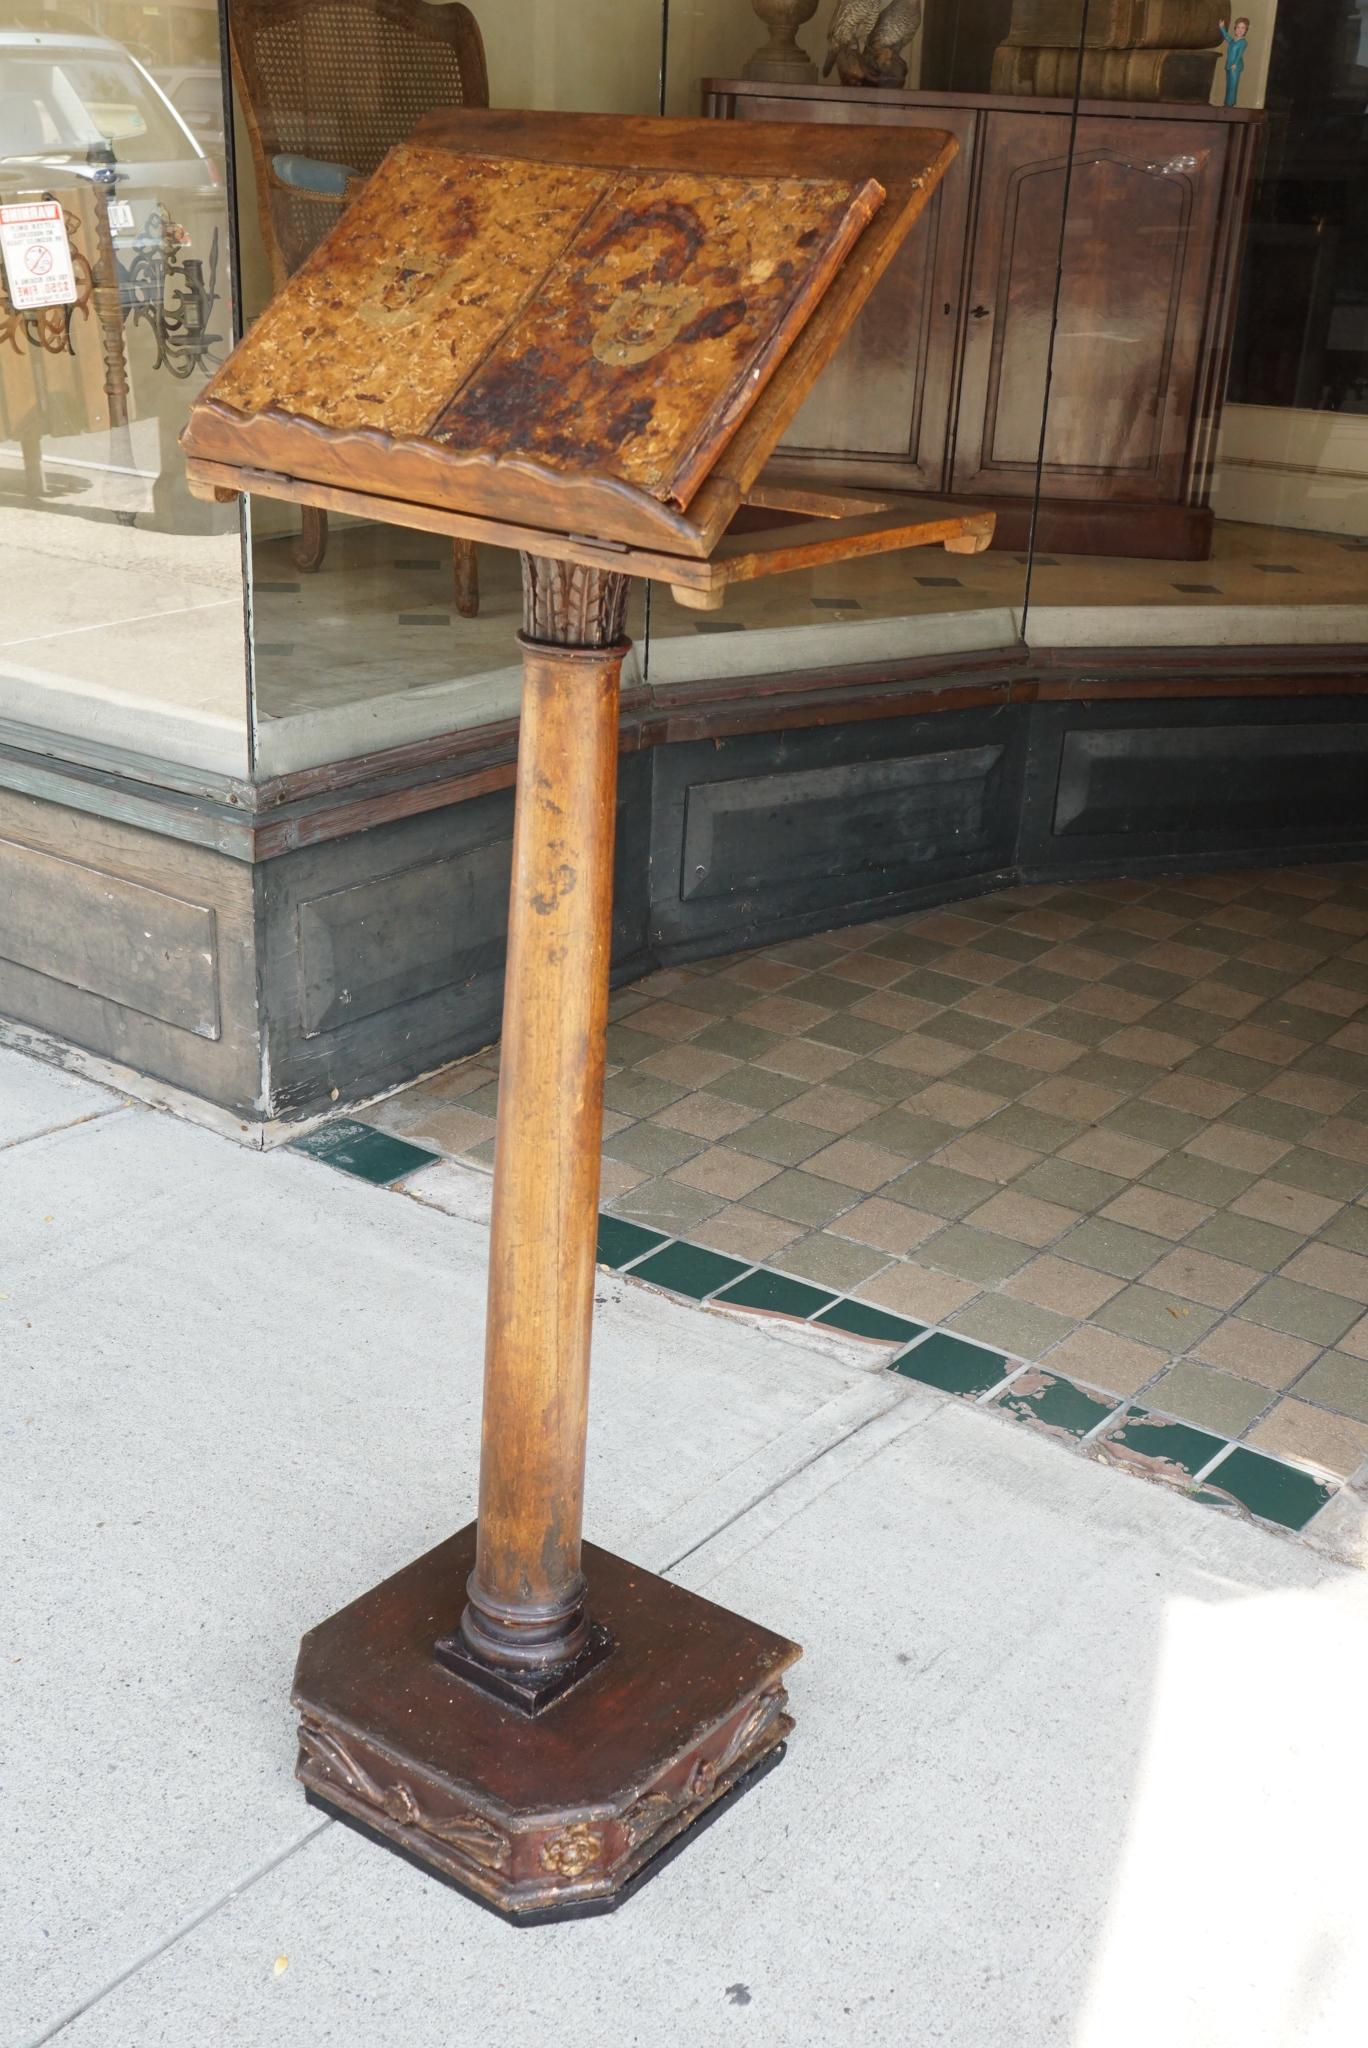 This lovely podium or book stand from Italy was made circa 1760. The actual articulated top is a 19th-century replacement but surely similar to its original top. Made from carved walnut and then painted and stained the stand comes from a Berkshires